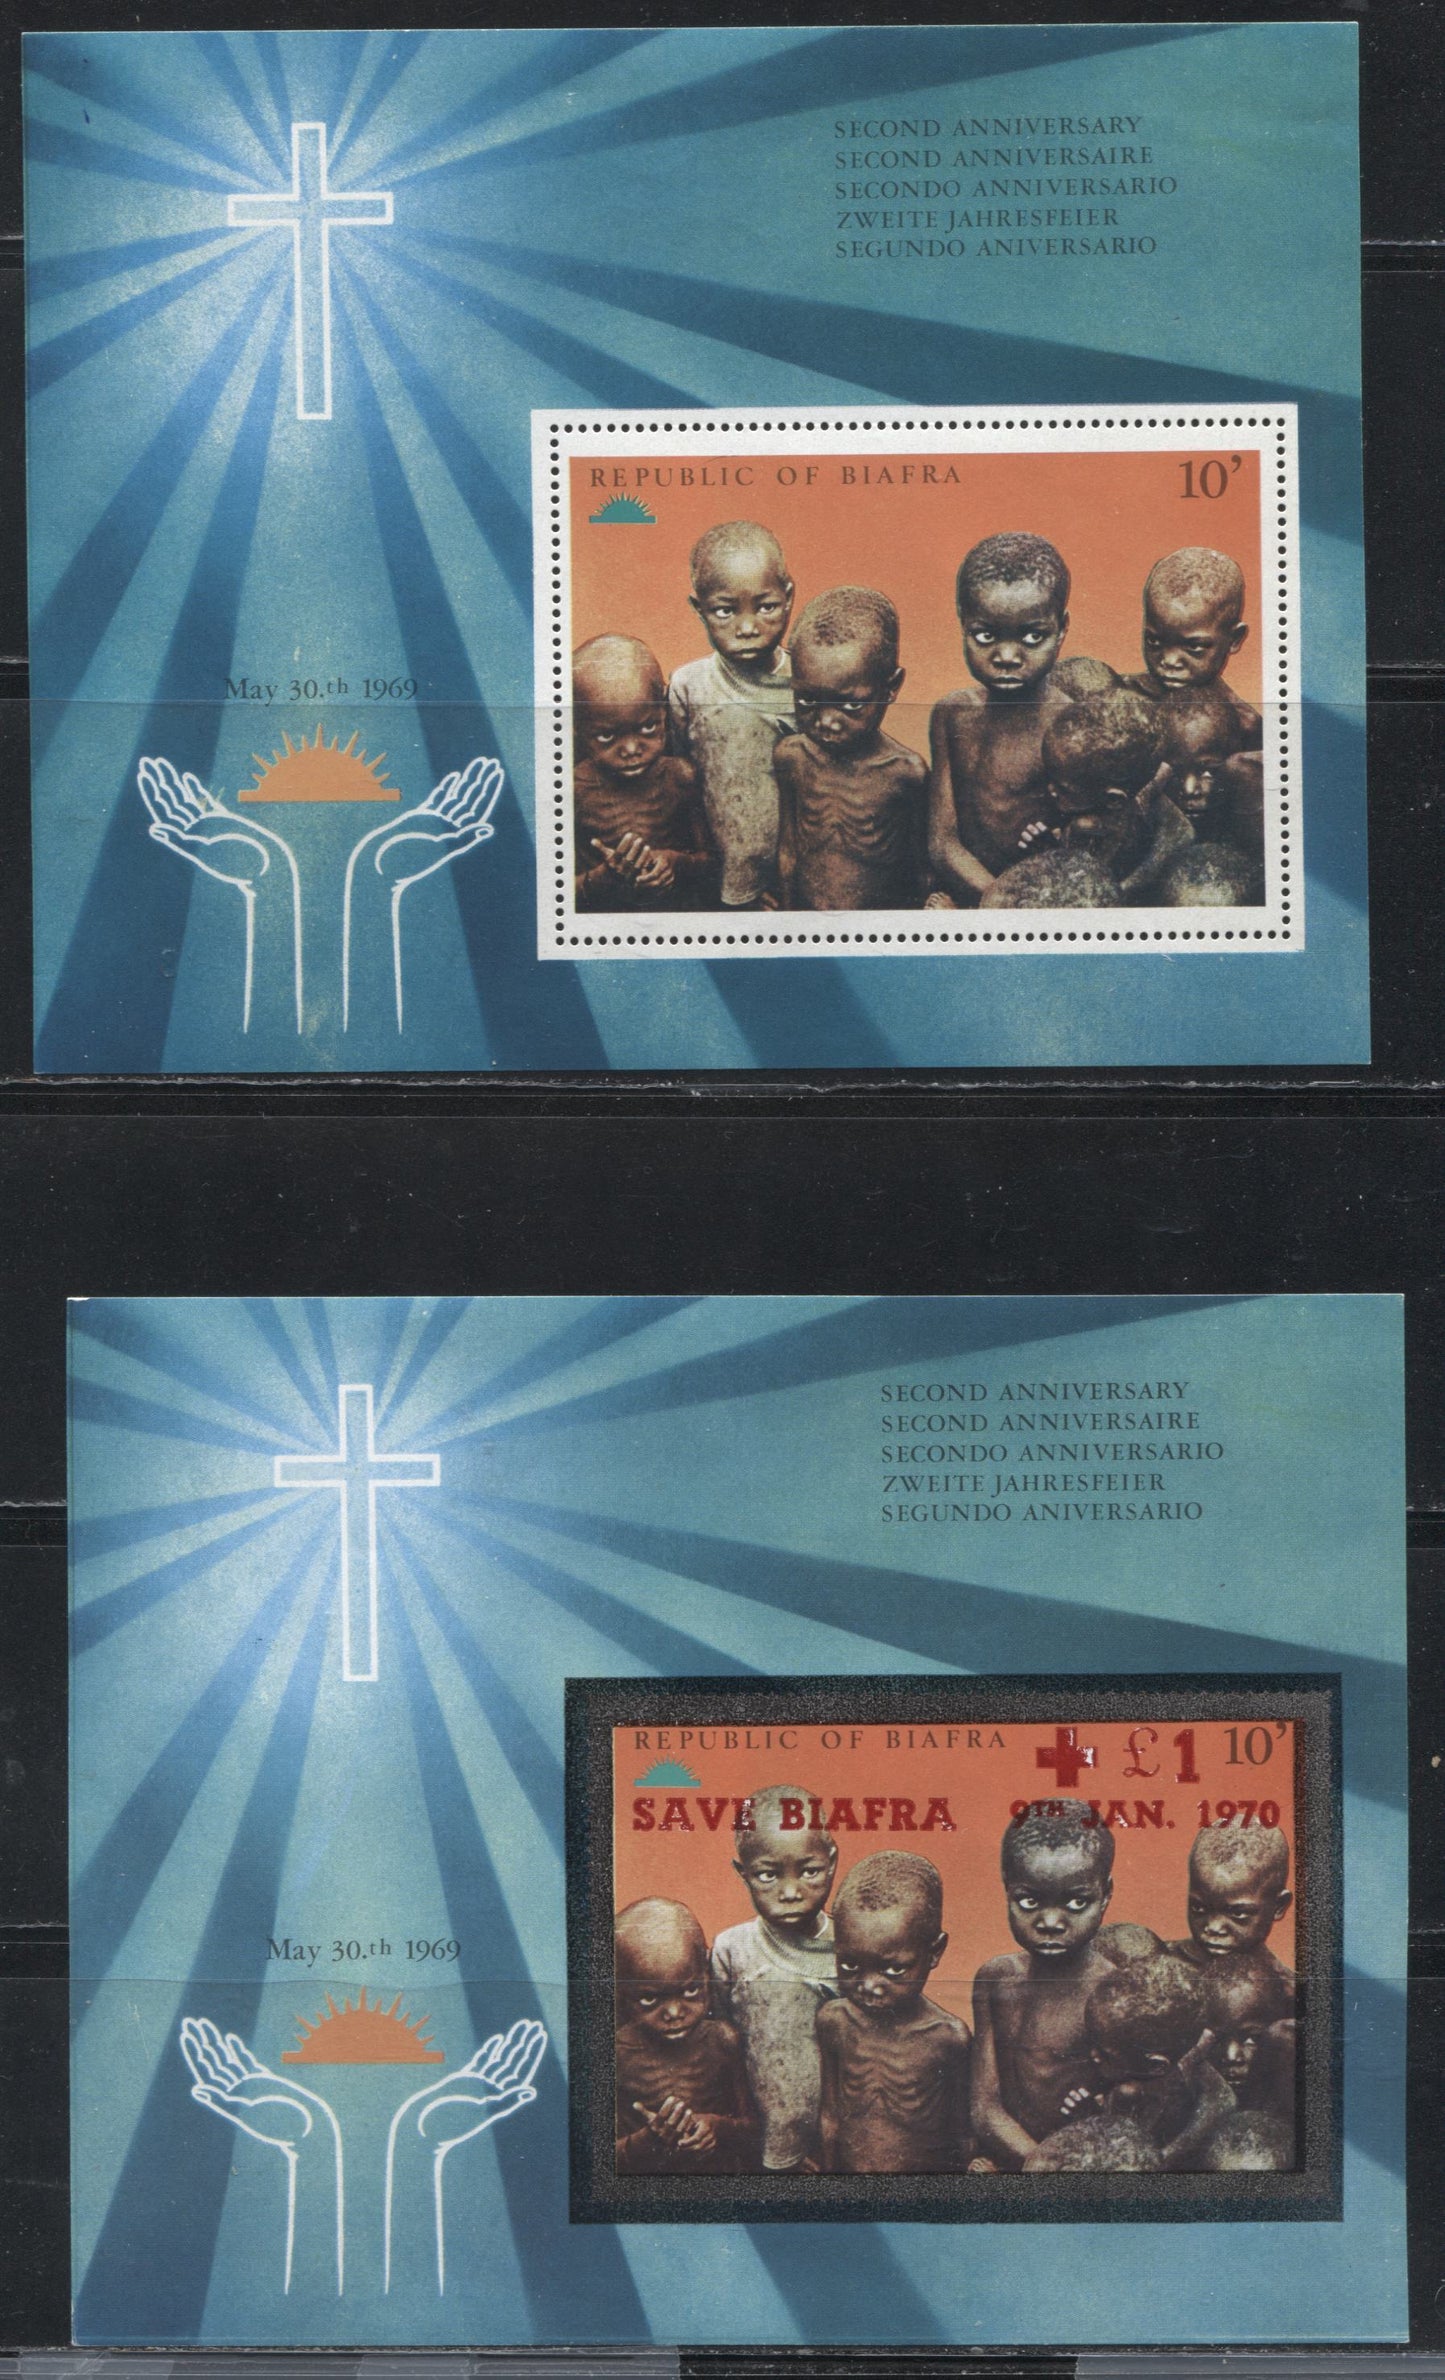 Lot 264 Nigeria - Biafra Unlisted 1969 Second Anniversary of Independence 4 Perf and Imperf Souvenir Sheets With and Without "Save Biafra" Overprints, VFNH and Fine NH